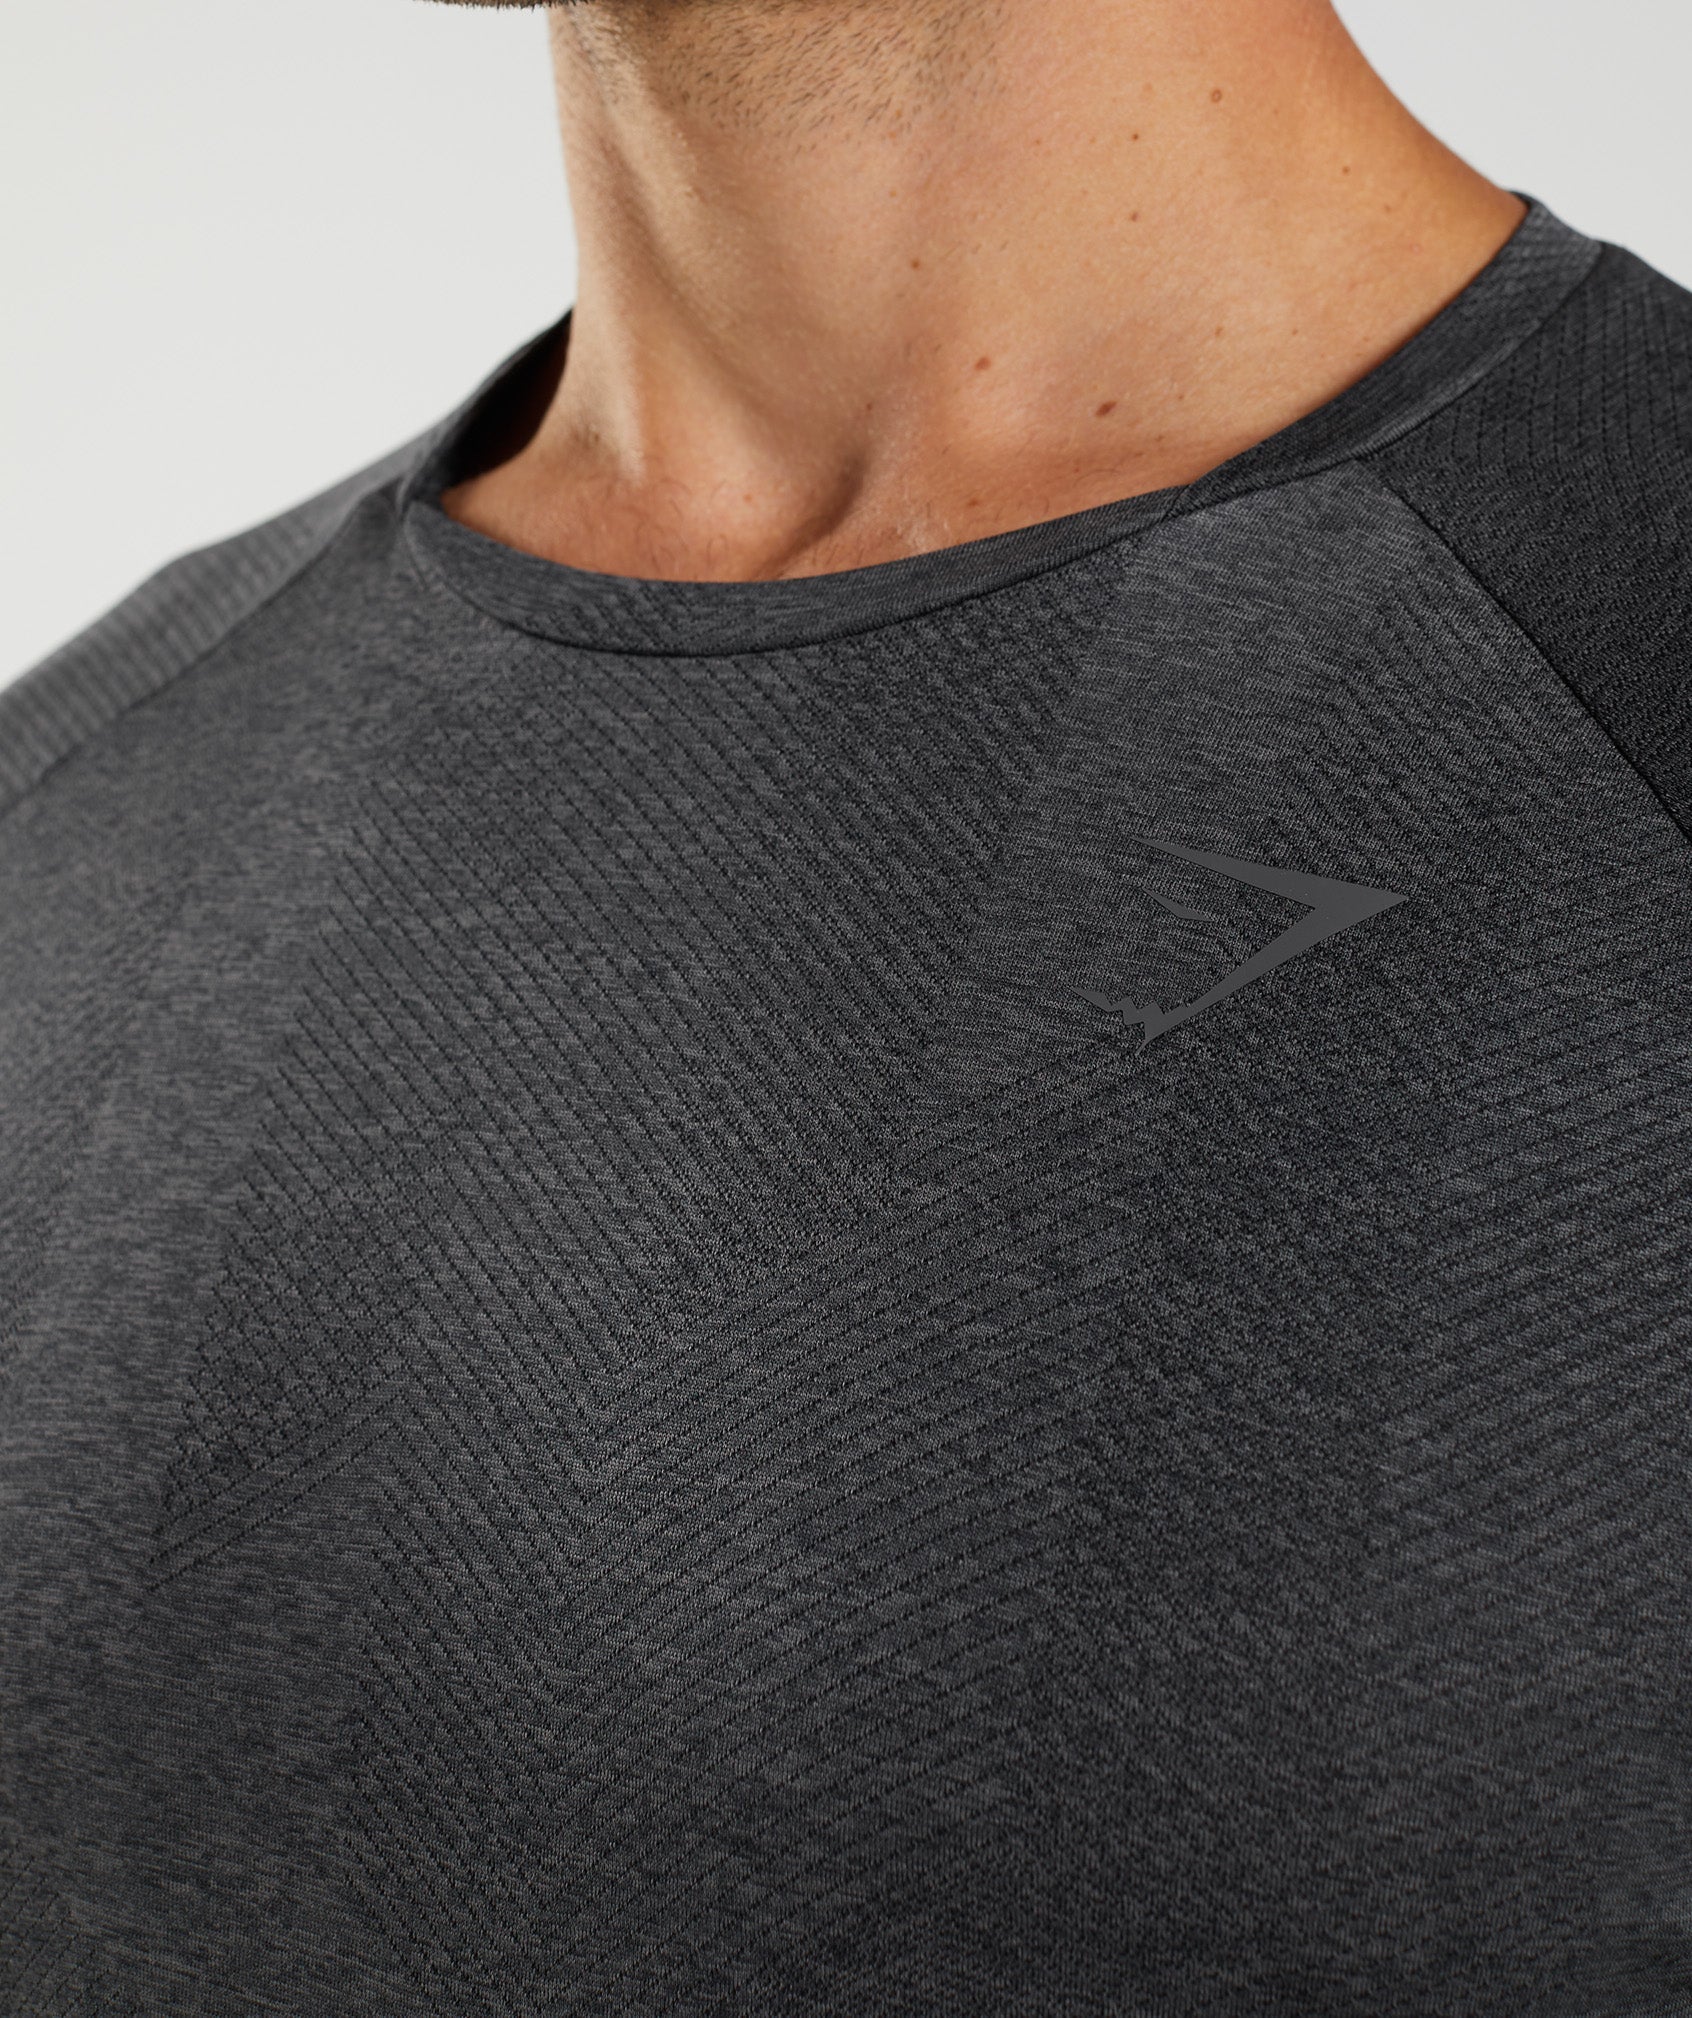 Apex Long Sleeve T-Shirt in Black/Silhouette Grey - view 6